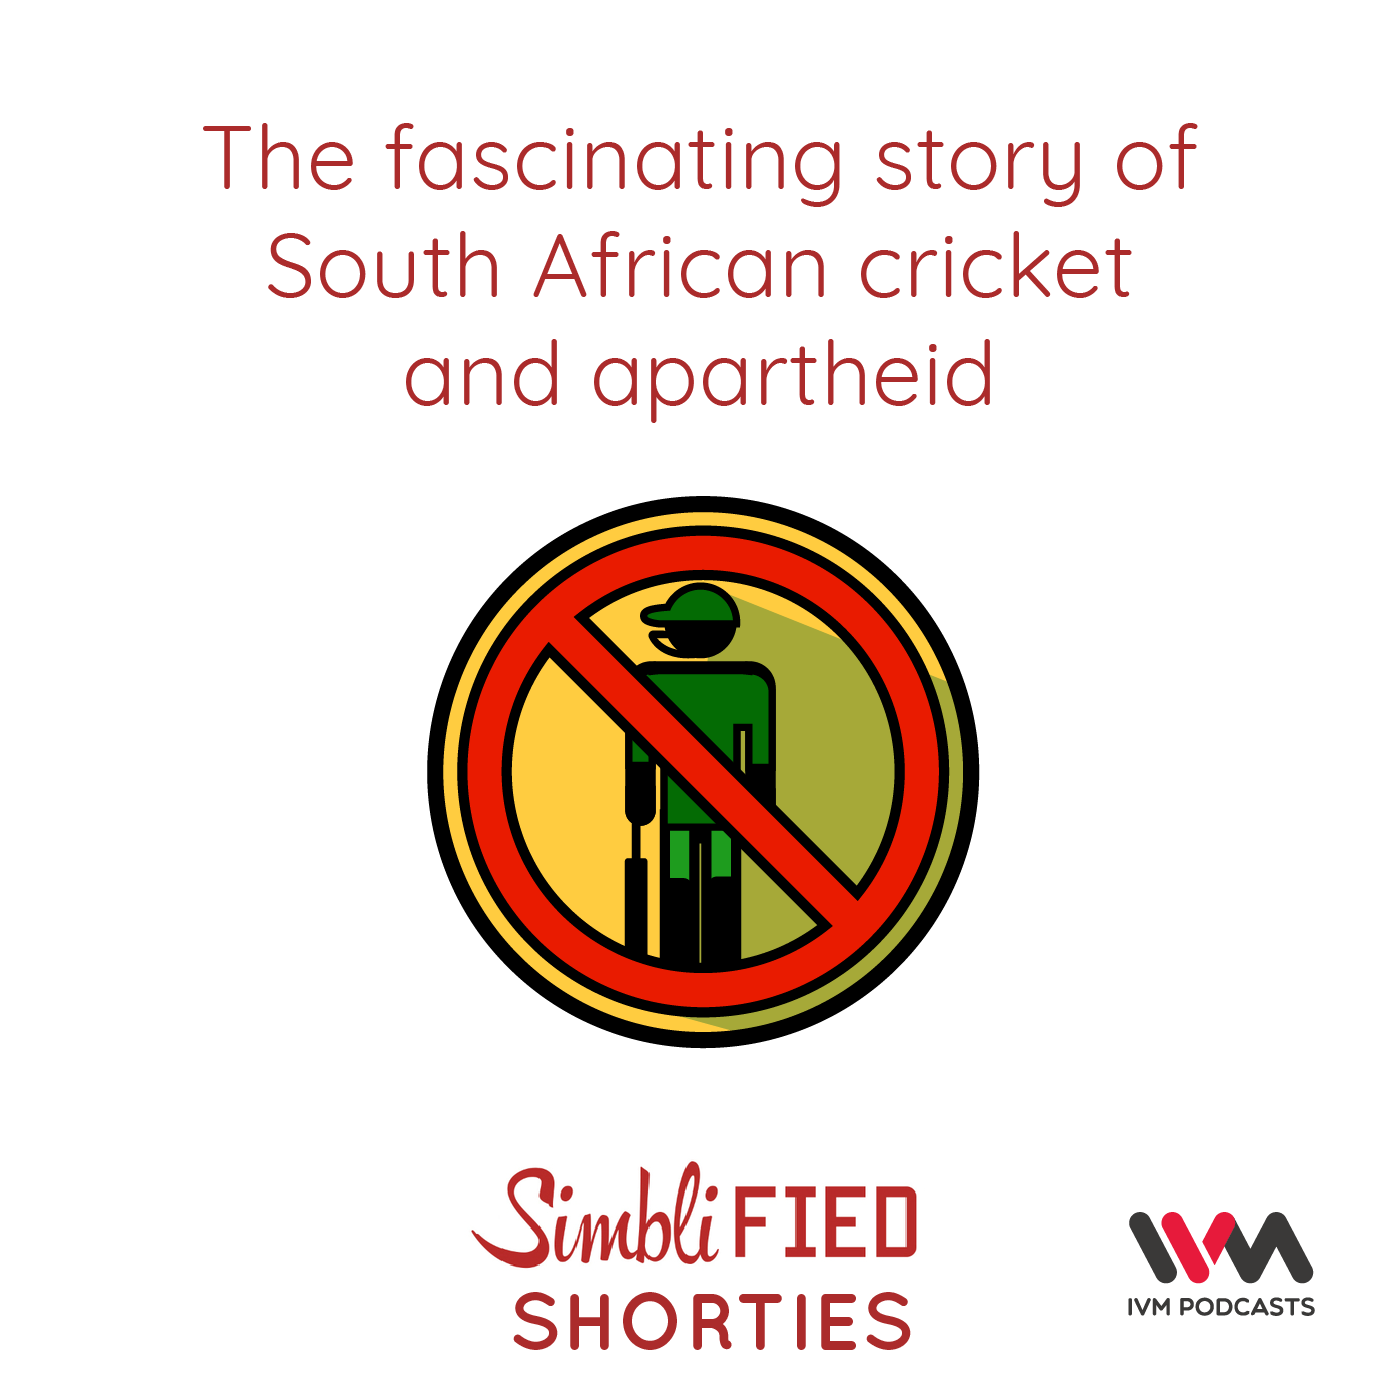 Ep. 147: The fascinating story of South African cricket and apartheid